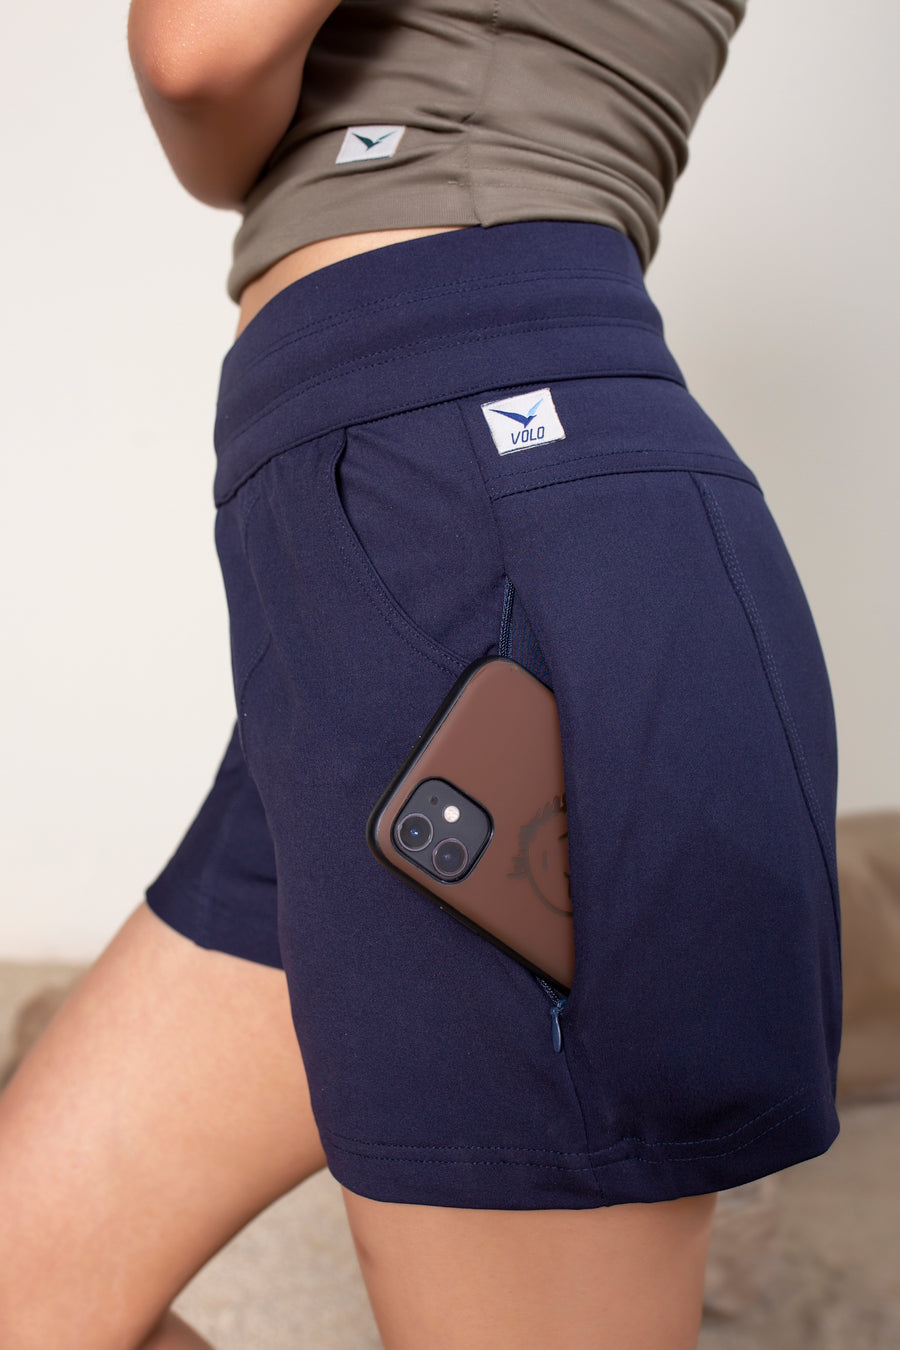 Women's Terra Shorts Navy | VOLO Apparel | A blend of technology, function, and style. The Terra shorts are designed and ready for every active opportunity that comes your way. Your first women's shorts with deep pockets, a snap button smart phone pocket, a zippered key pocket, and a hidden zippered back pocket.  High waisted, great for climbing, yoga, training, running and chilling.